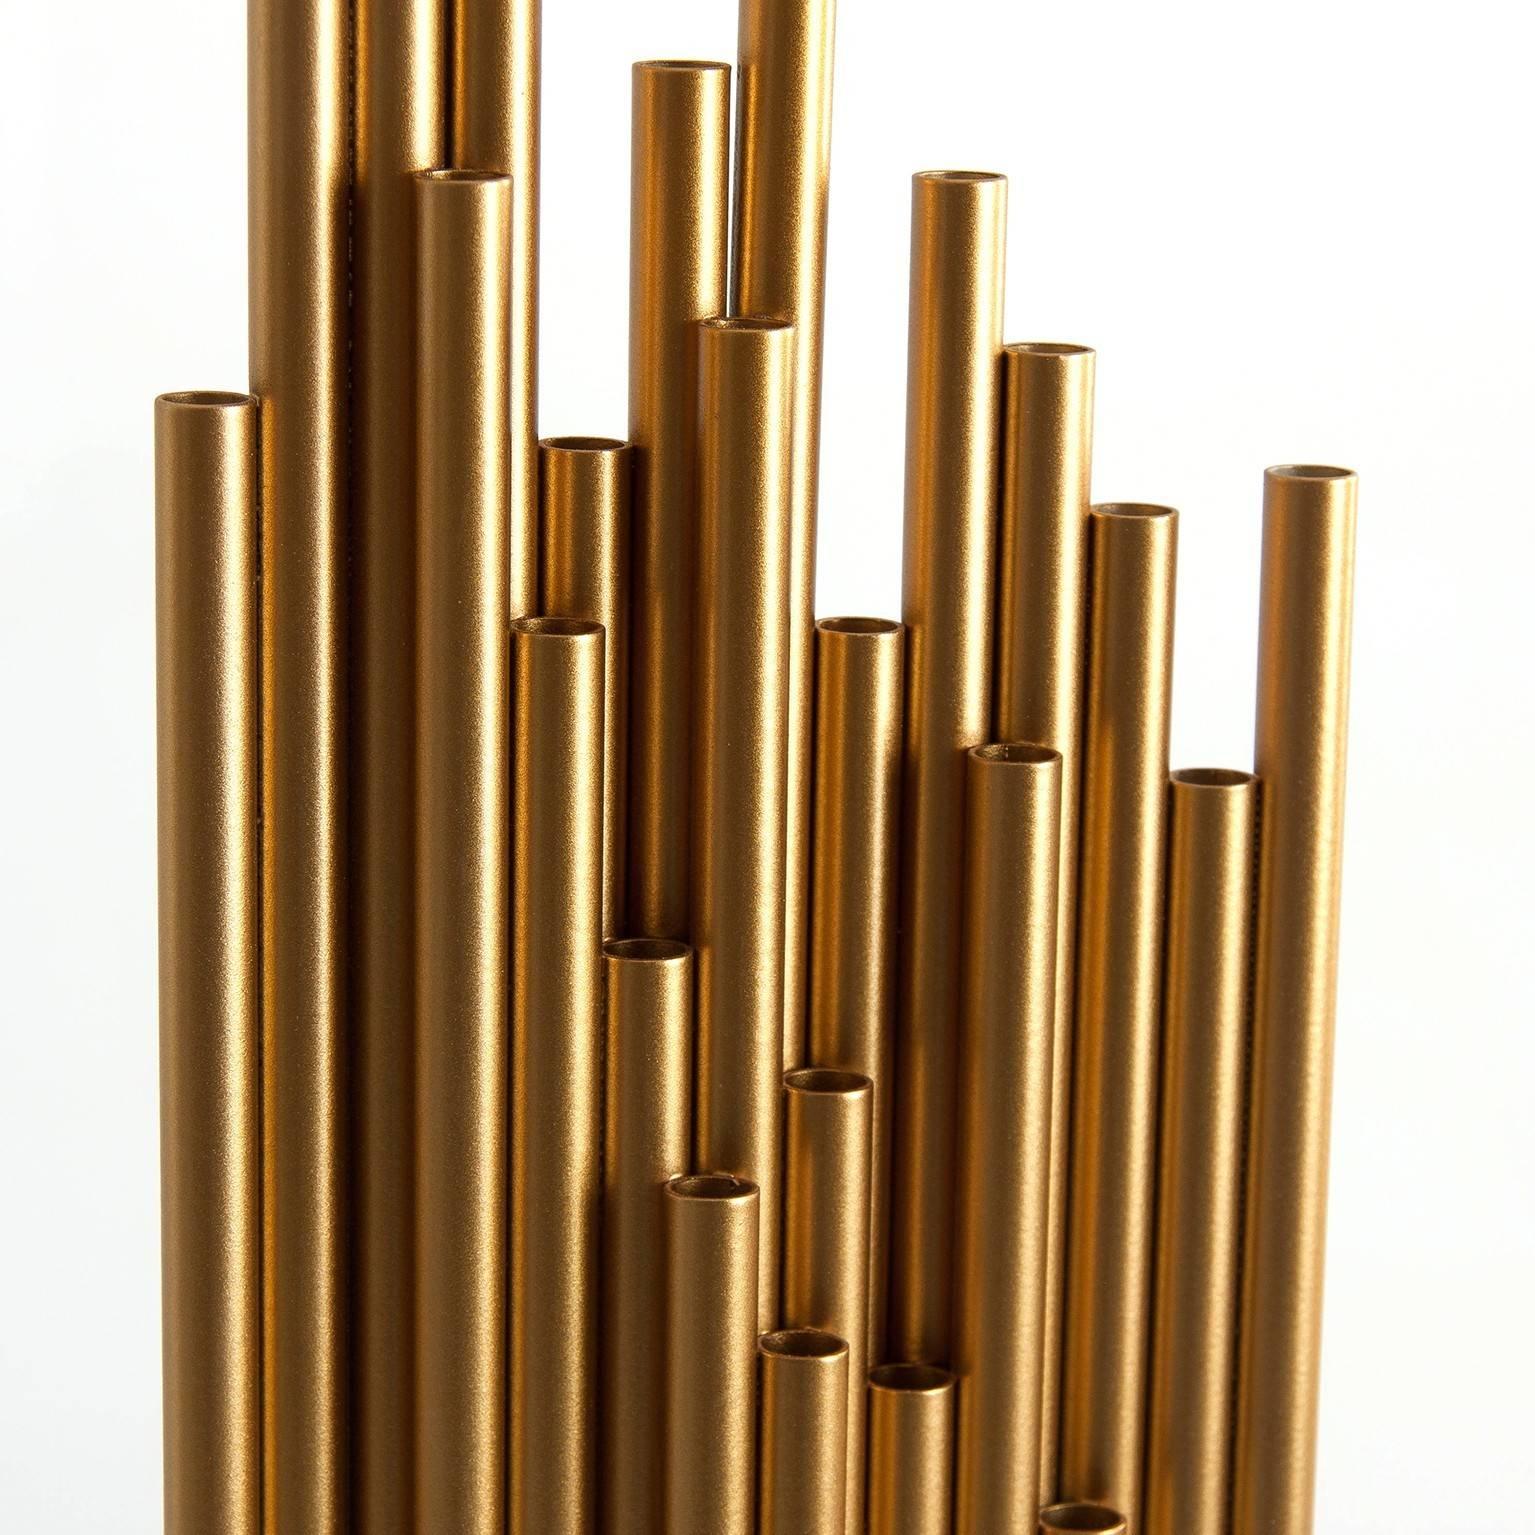 Gilded Cylinder Floor Lamp in Gold Finish, including
black shade.